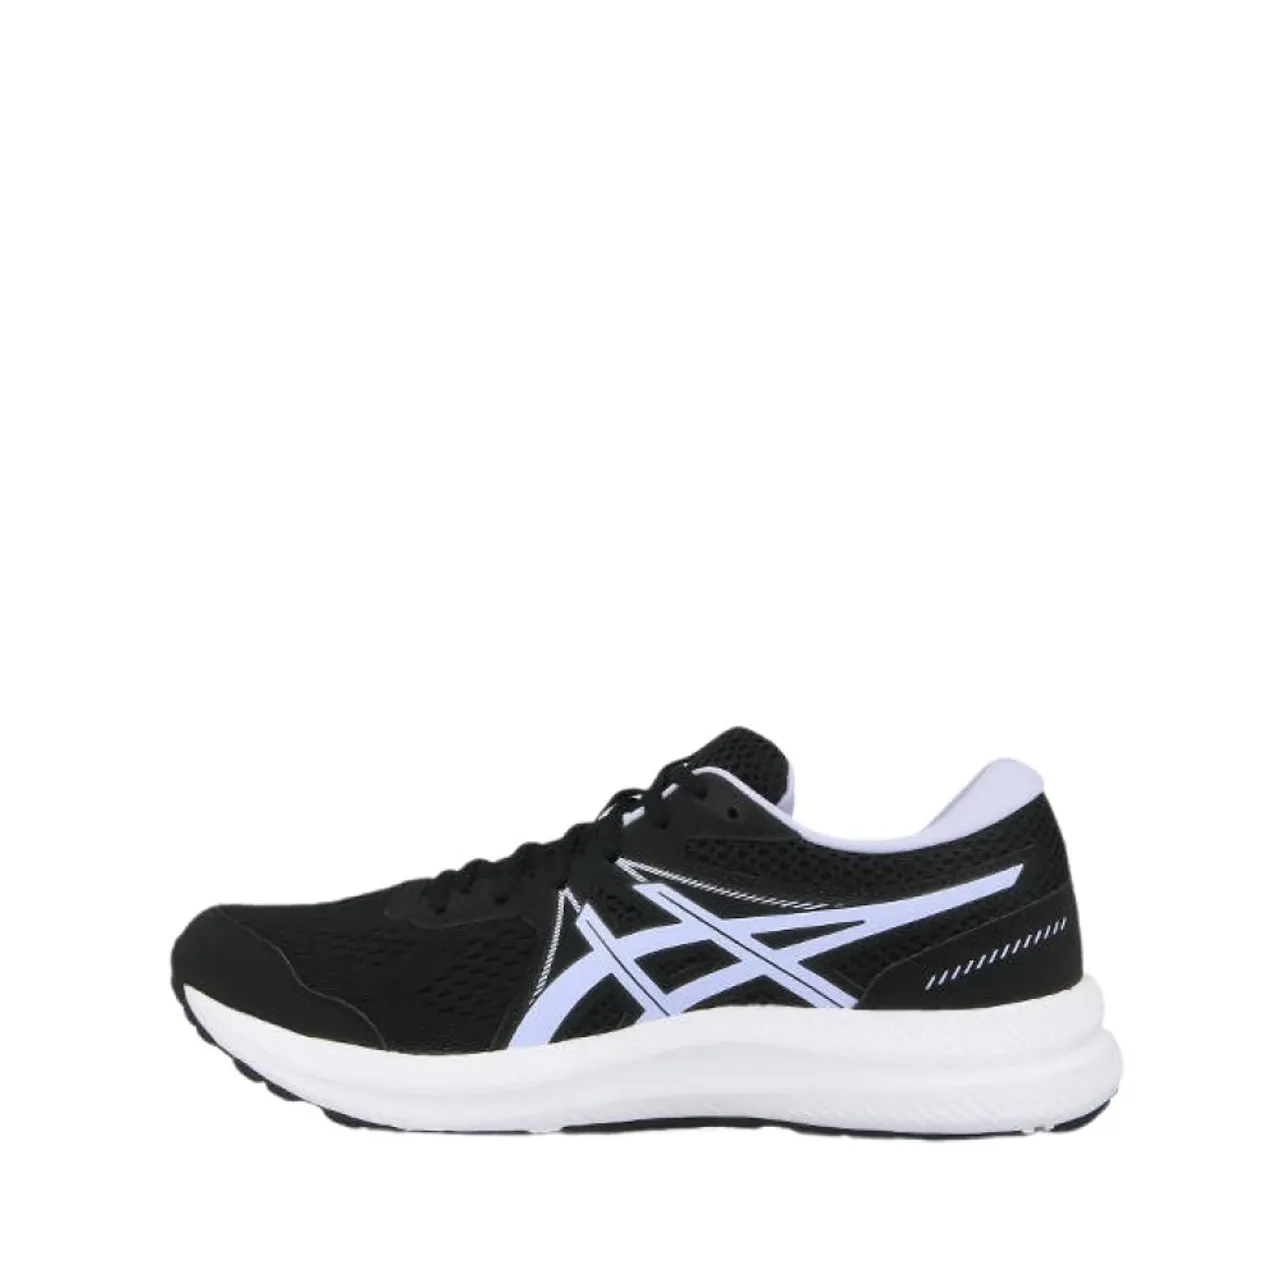 Asics , 7 Sneakers, Gel-Contend Style ,Black male, Sizes: